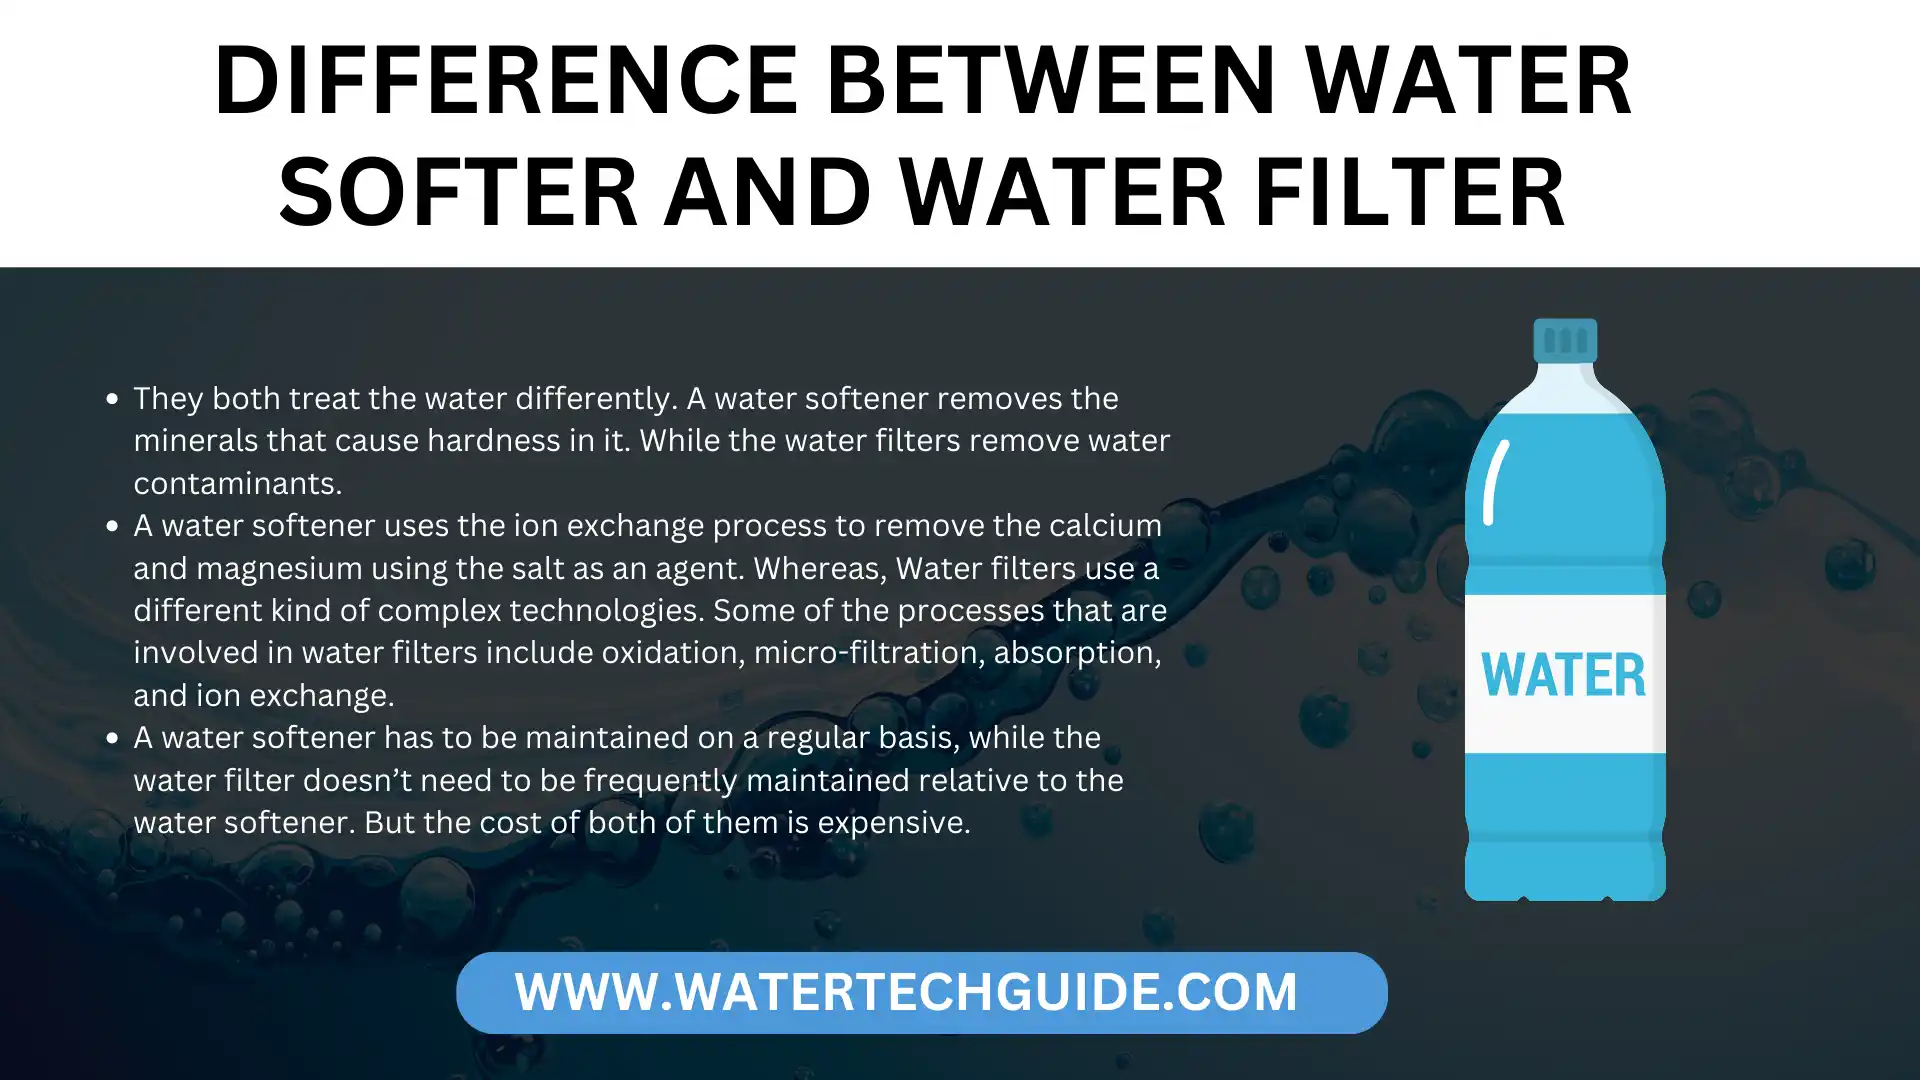 Difference Between Water Softer and Water Filter